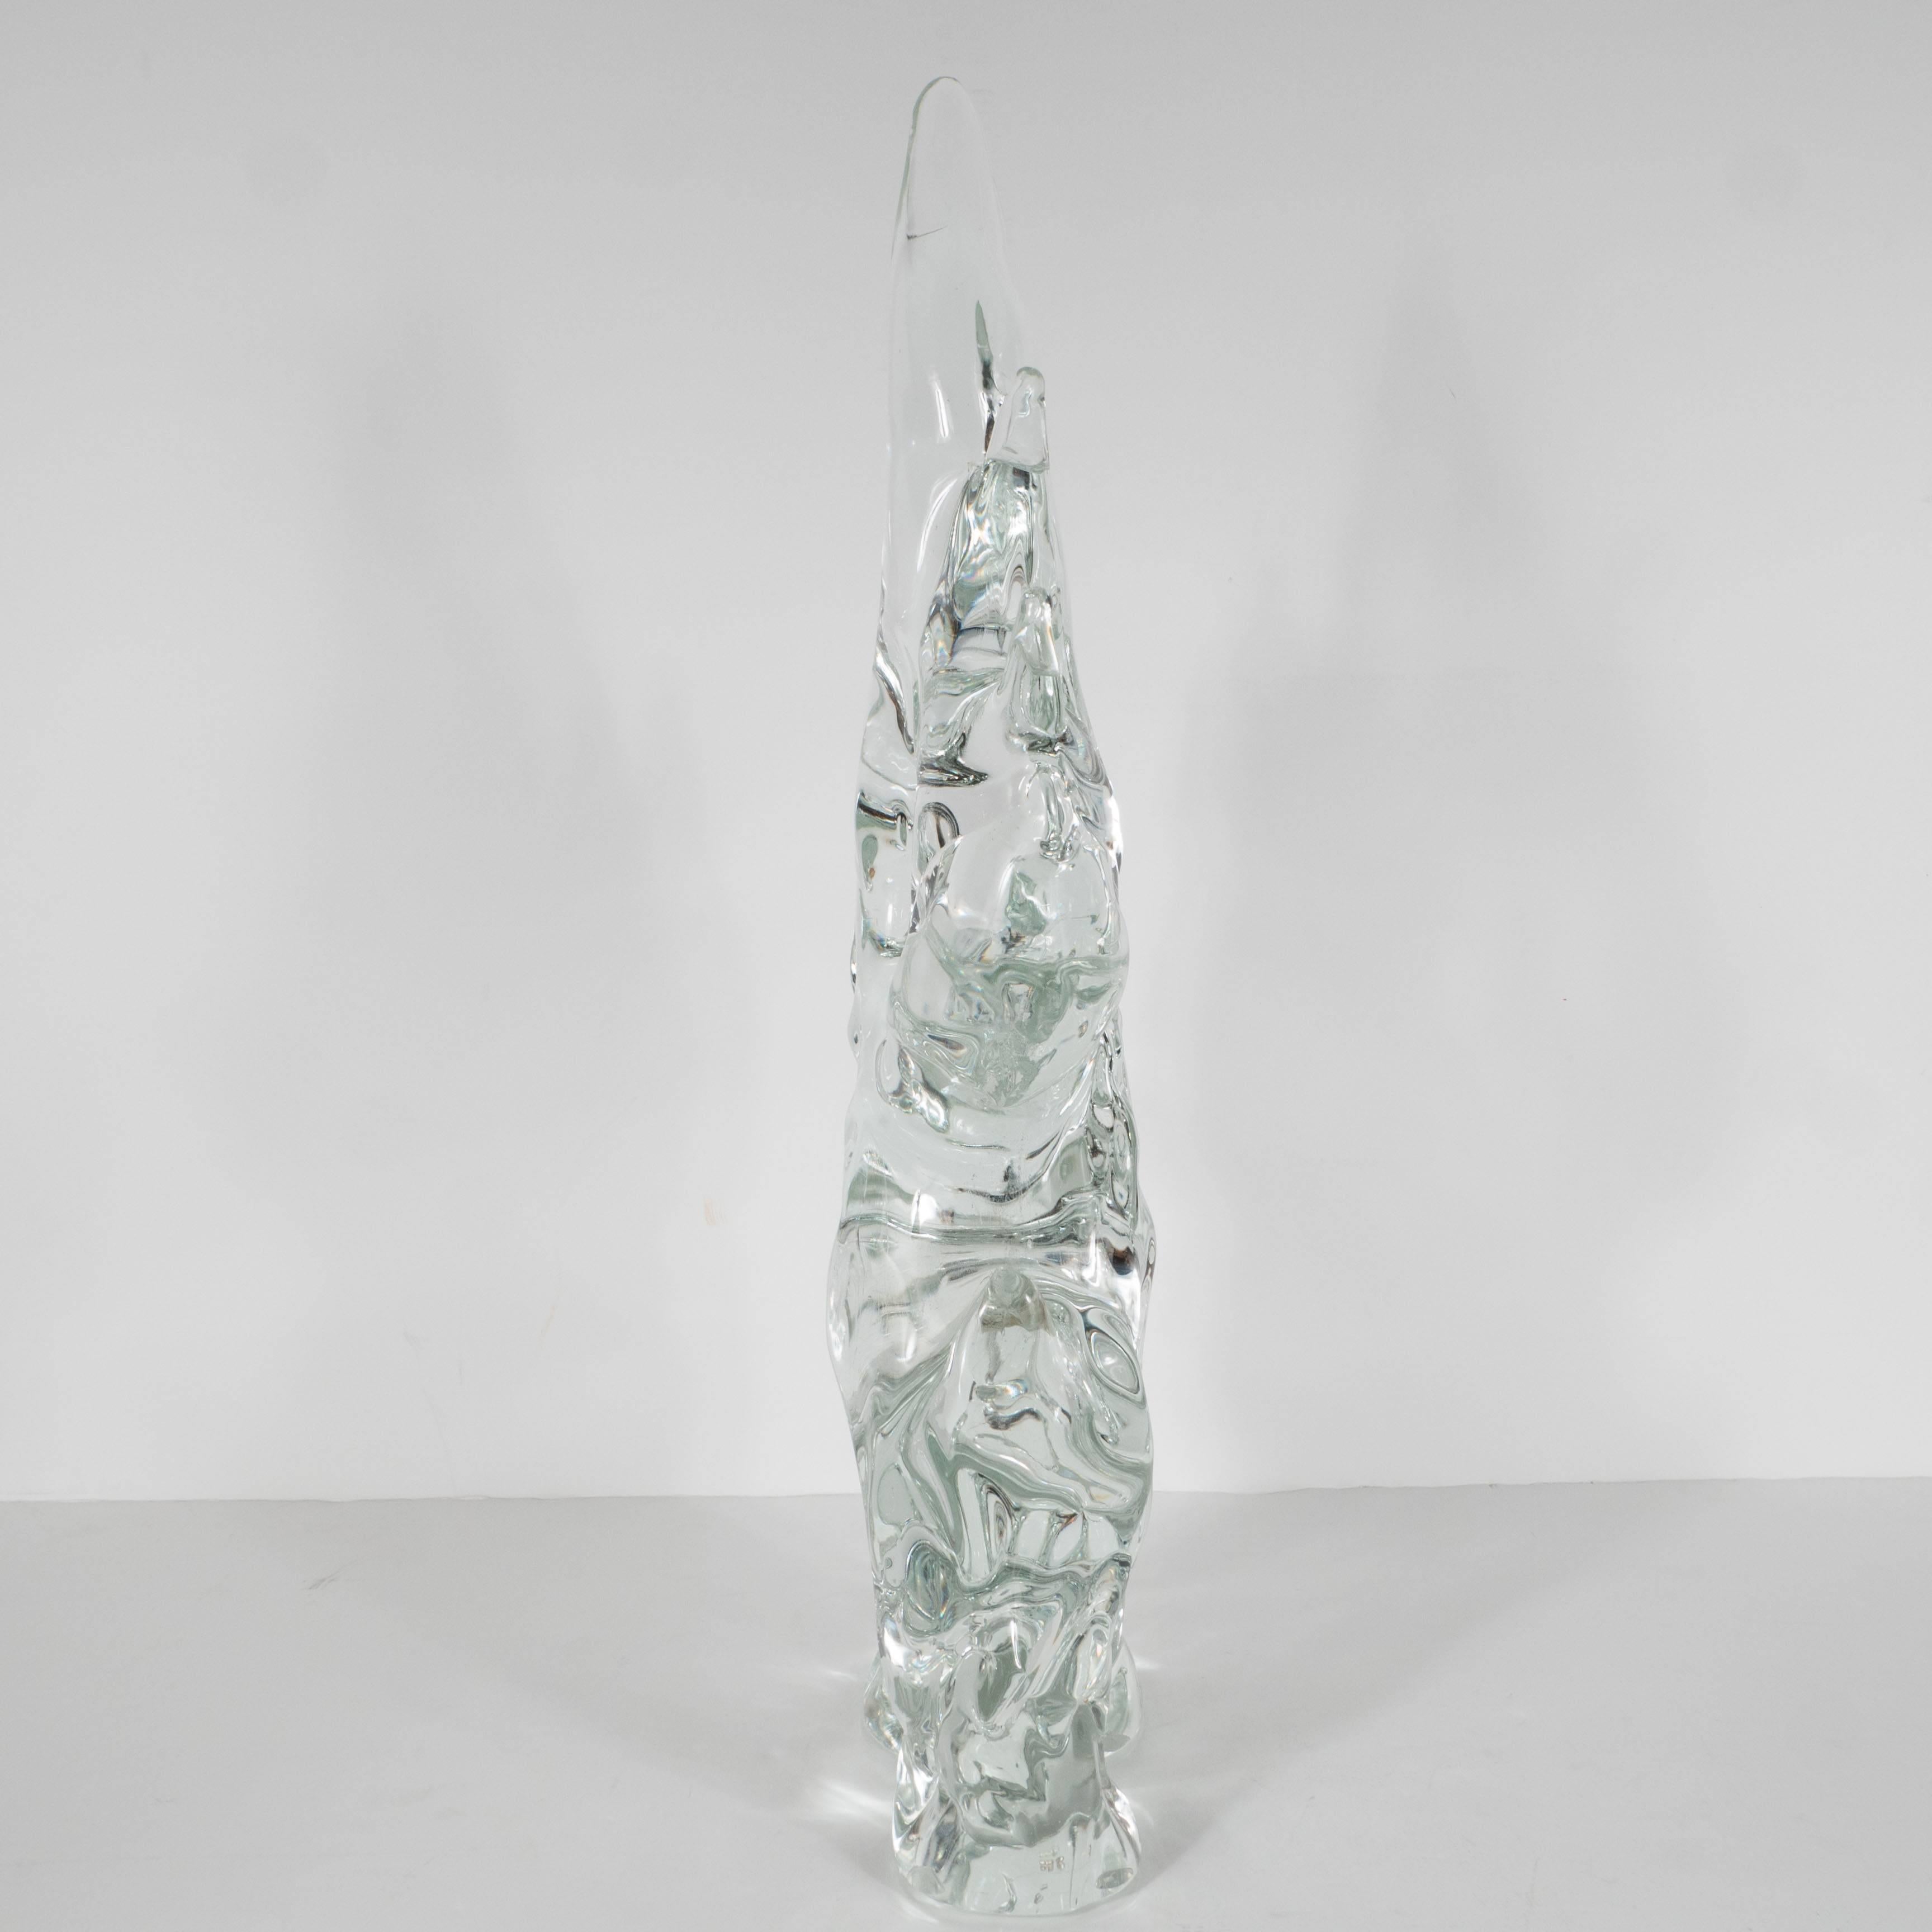 Mid-Century Modermnist handblown iceberg glass sculpture, Italy, circa 1970.

This stylish iconic Mid-Century Modern sculpture in shape of an abstract ice berg creates the ultimate cool interior. Excellent condition.

Measures: 4.5